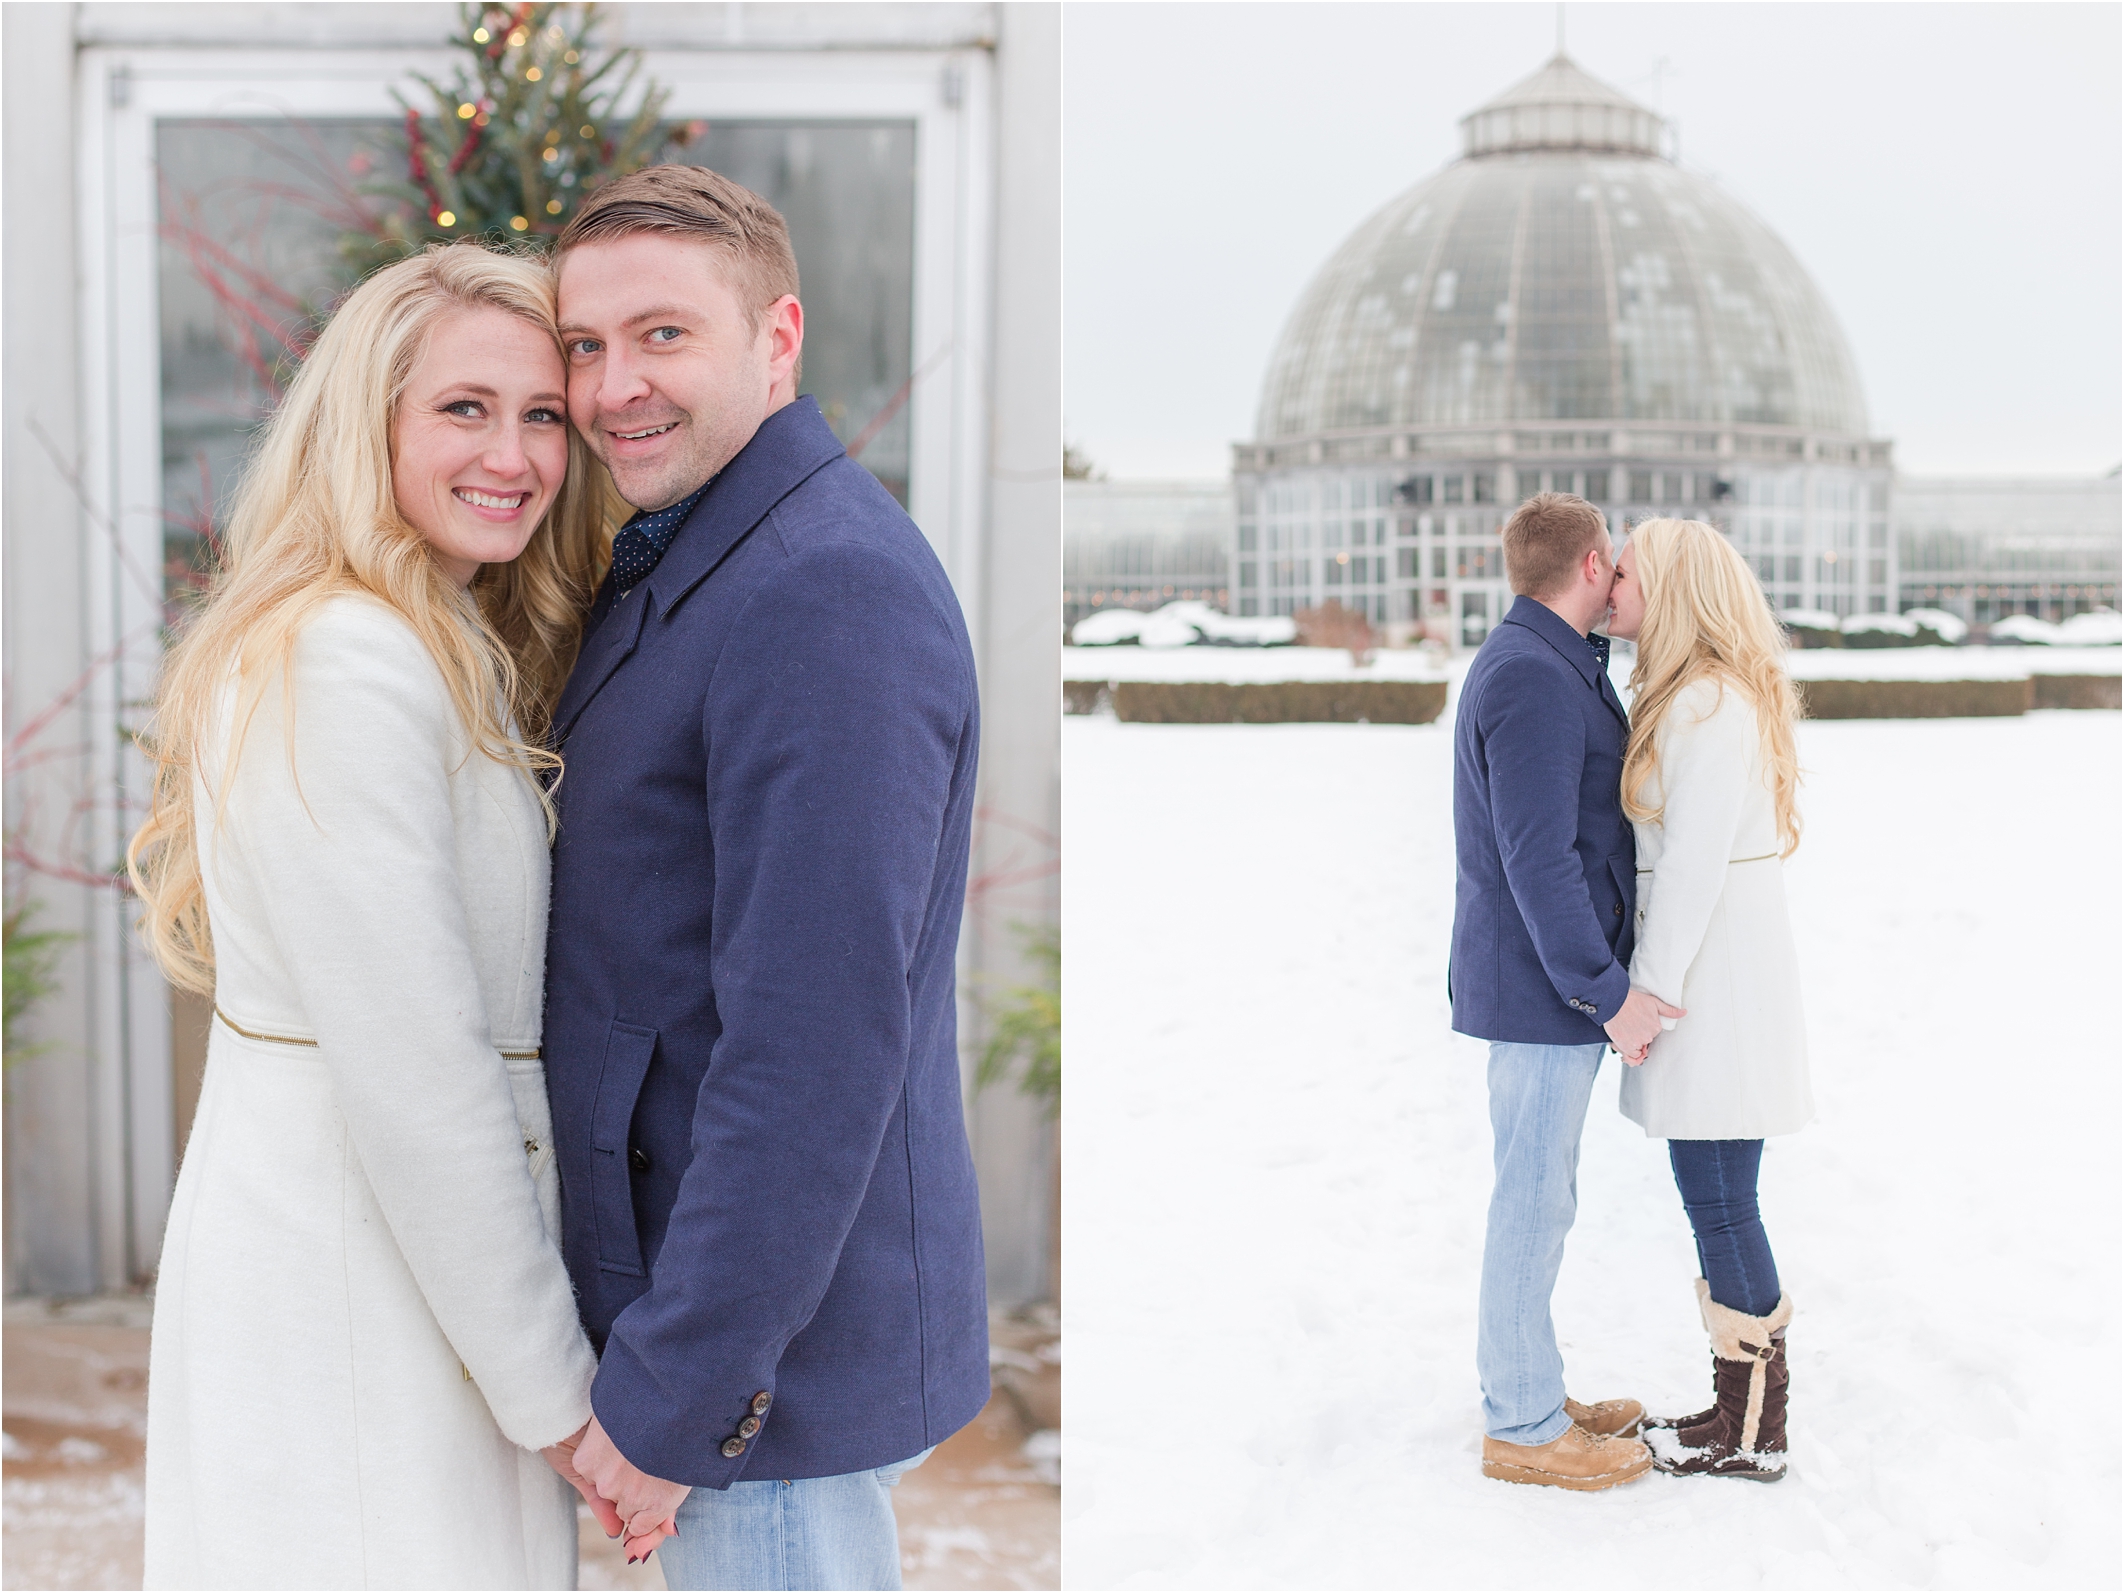 elegant-classic-belle-isle-conservatory-engagement-photos-in-detroit-mi-by-courtney-carolyn-photography_0036.jpg